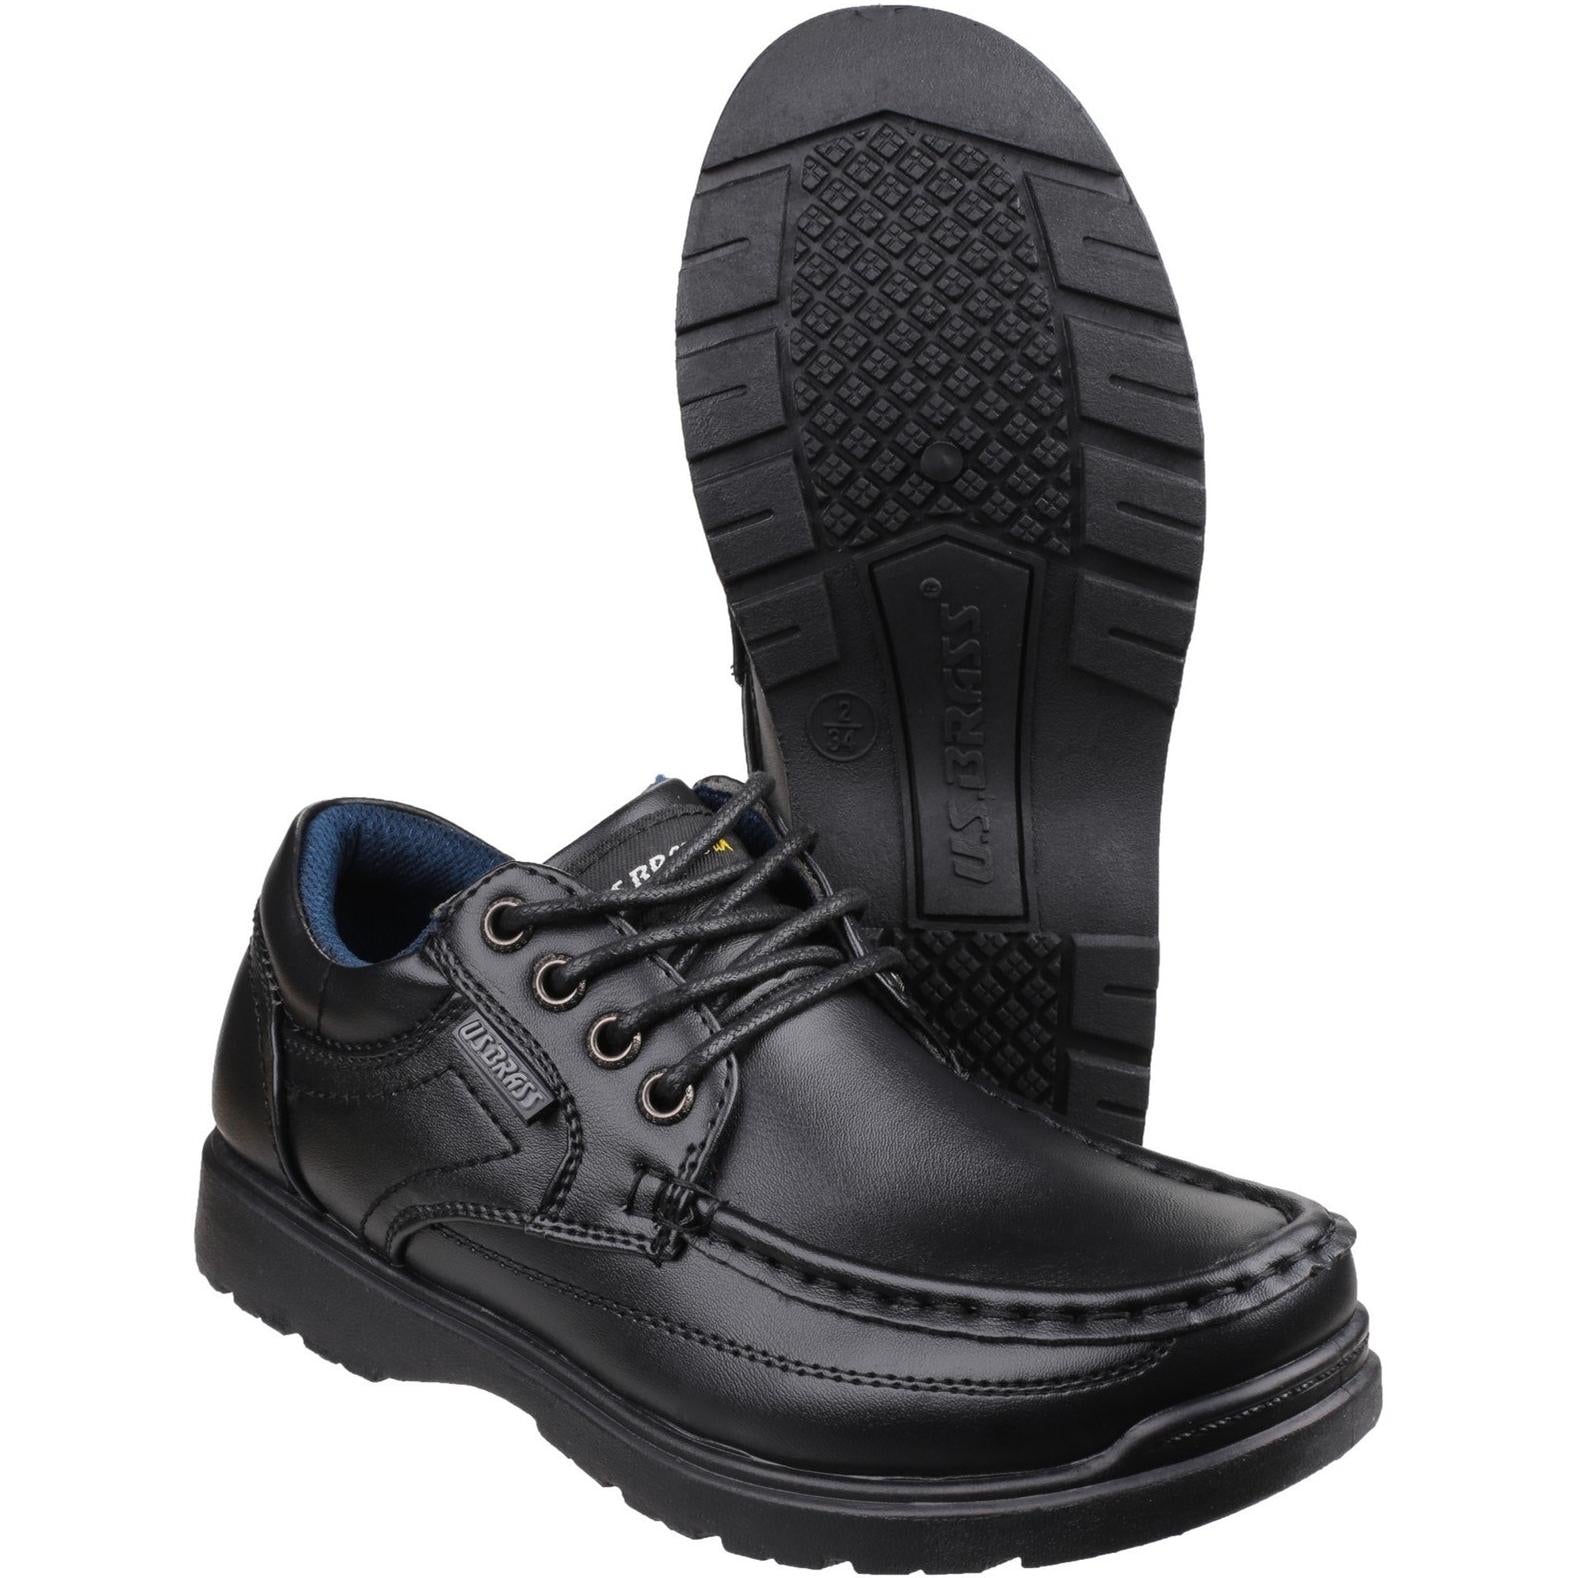 Miscellaneous Other Stubby 2 Boys Back to School Lace Up Shoe